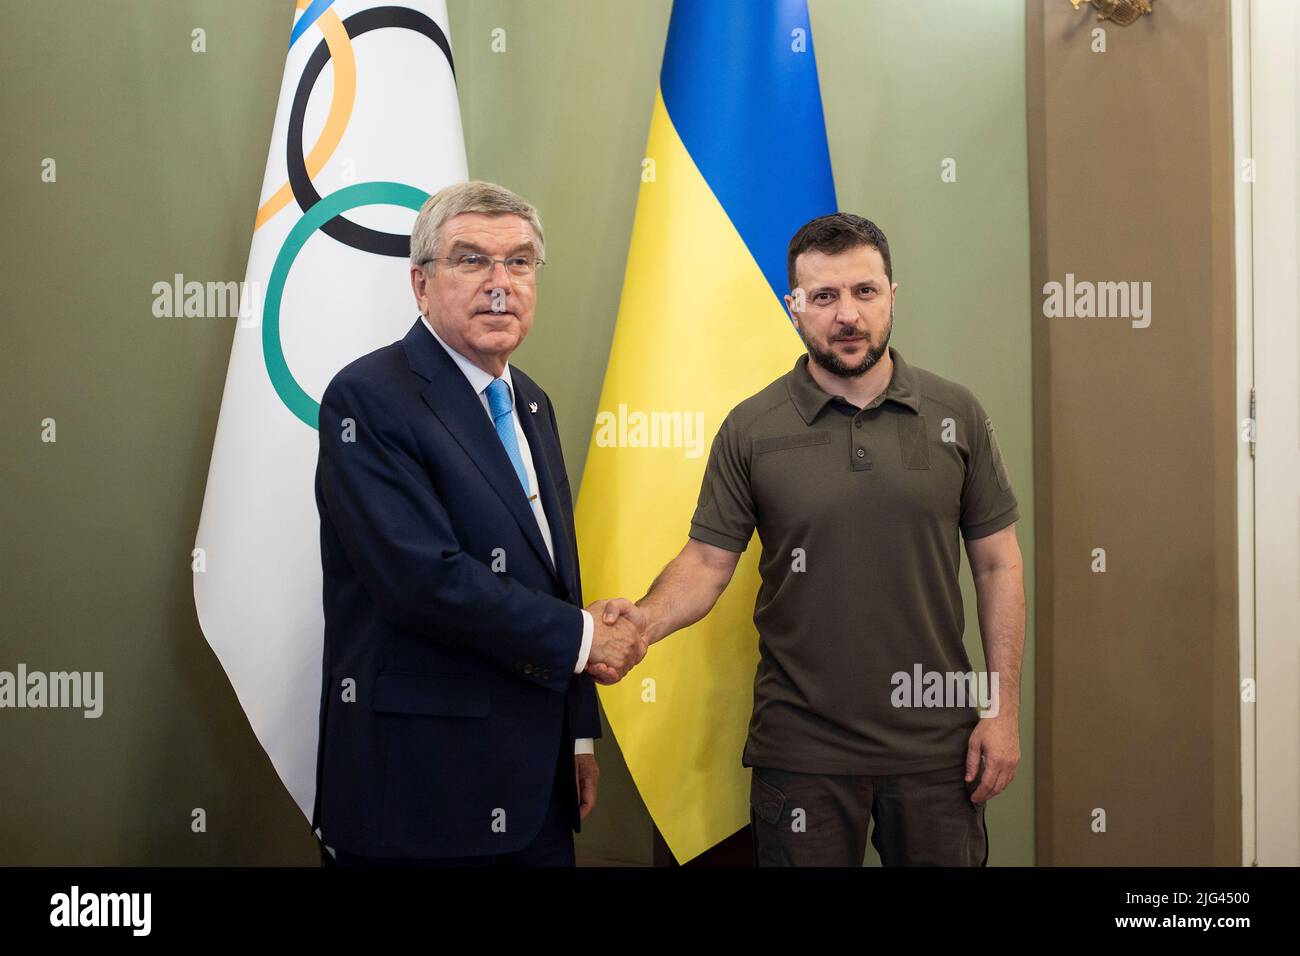 Kyiv, Ukraine. 03 July, 2022. Ukrainian President Volodymyr Zelenskyy, right, shakes hands with International Olympic Committee President Thomas Bach, left, prior to their face-to-face meetings at the Mariinskyi Palace, July 3, 2022 in Kyiv, Ukraine.  Credit: Ukraine Presidency/Ukrainian Presidential Press Office/Alamy Live News Stock Photo